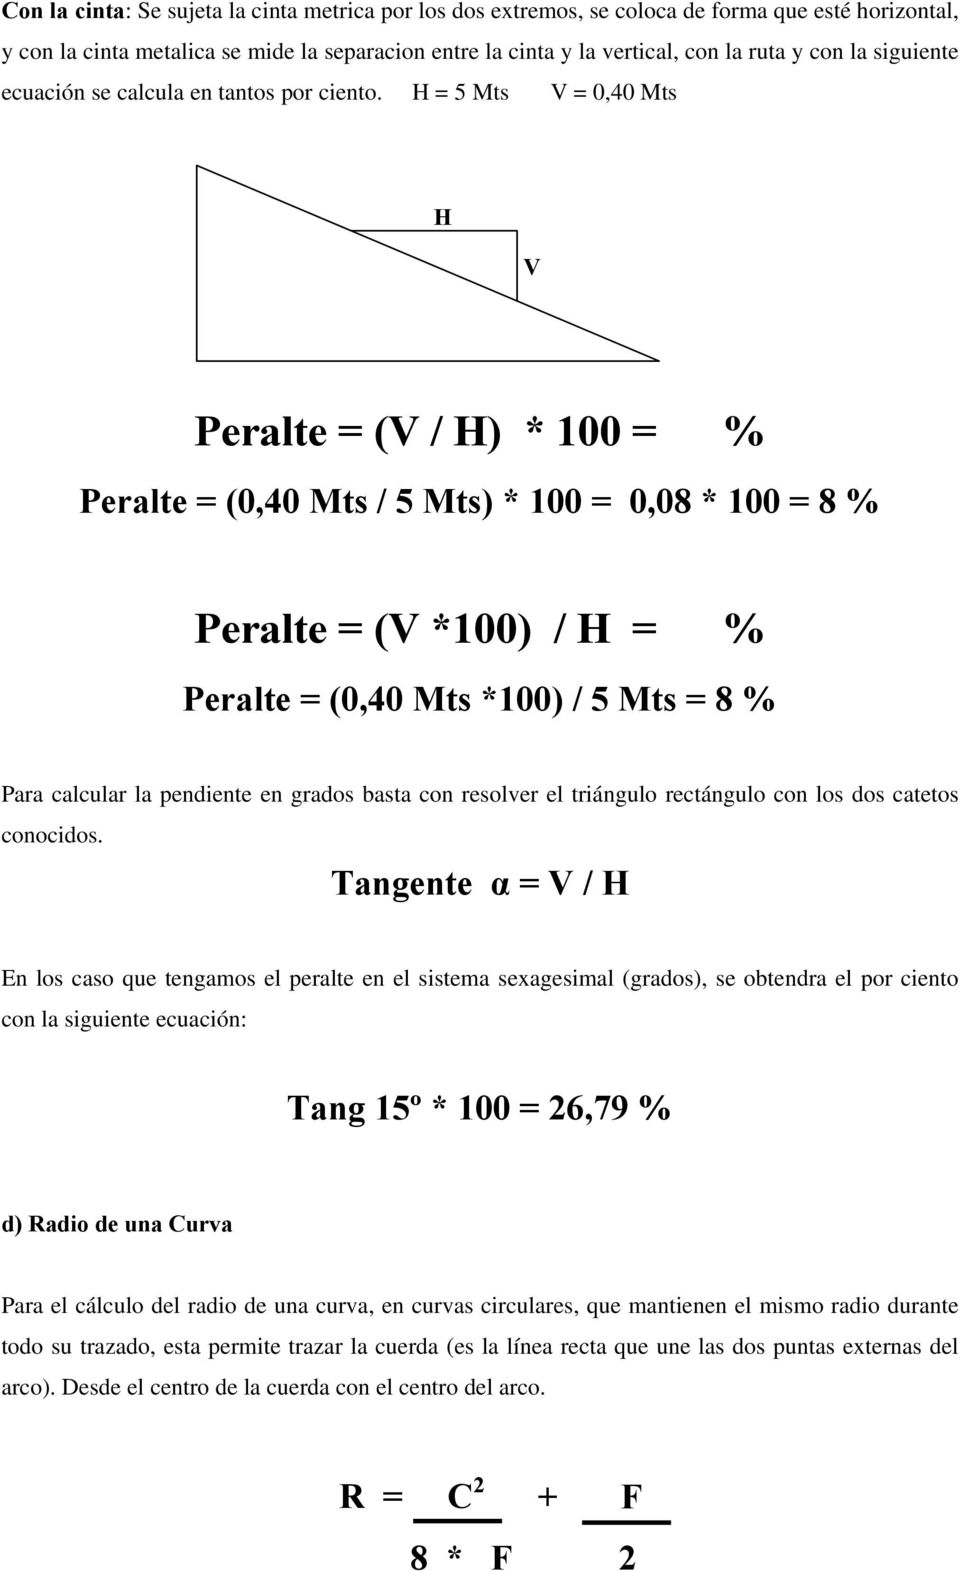 H = 5 Mts V = 0,40 Mts H V Peralte = (V / H) * 100 = % Peralte = (0,40 Mts / 5 Mts) * 100 = 0,08 * 100 = 8 % Peralte = (V *100) / H = % Peralte = (0,40 Mts *100) / 5 Mts = 8 % Para calcular la